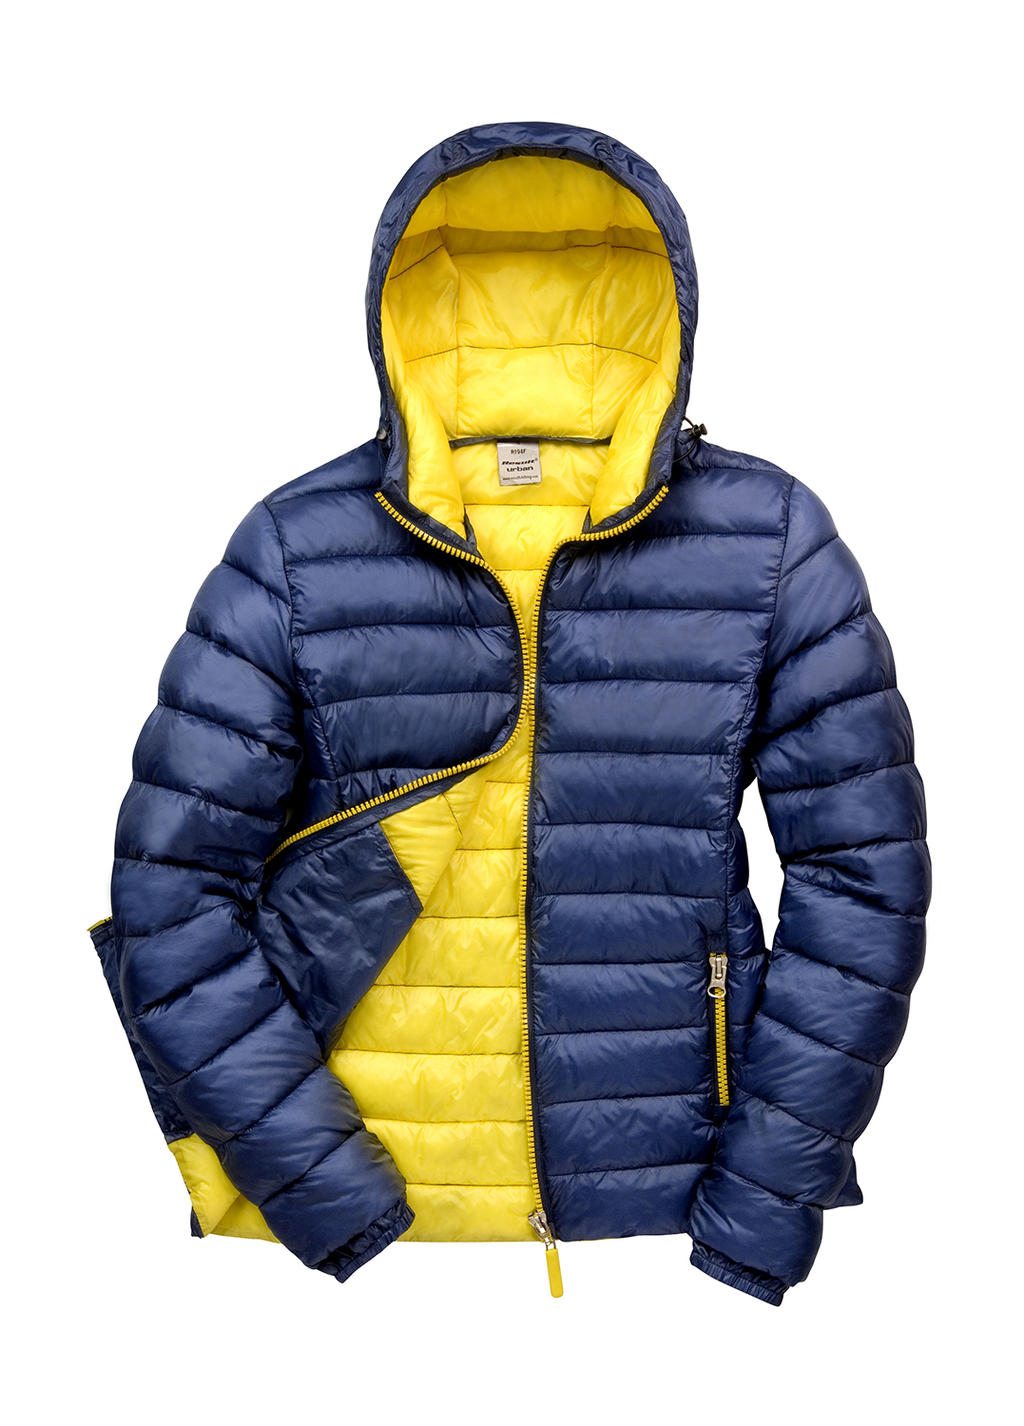  Ladies Snow Bird Hooded Jacket in Farbe Navy/Yellow